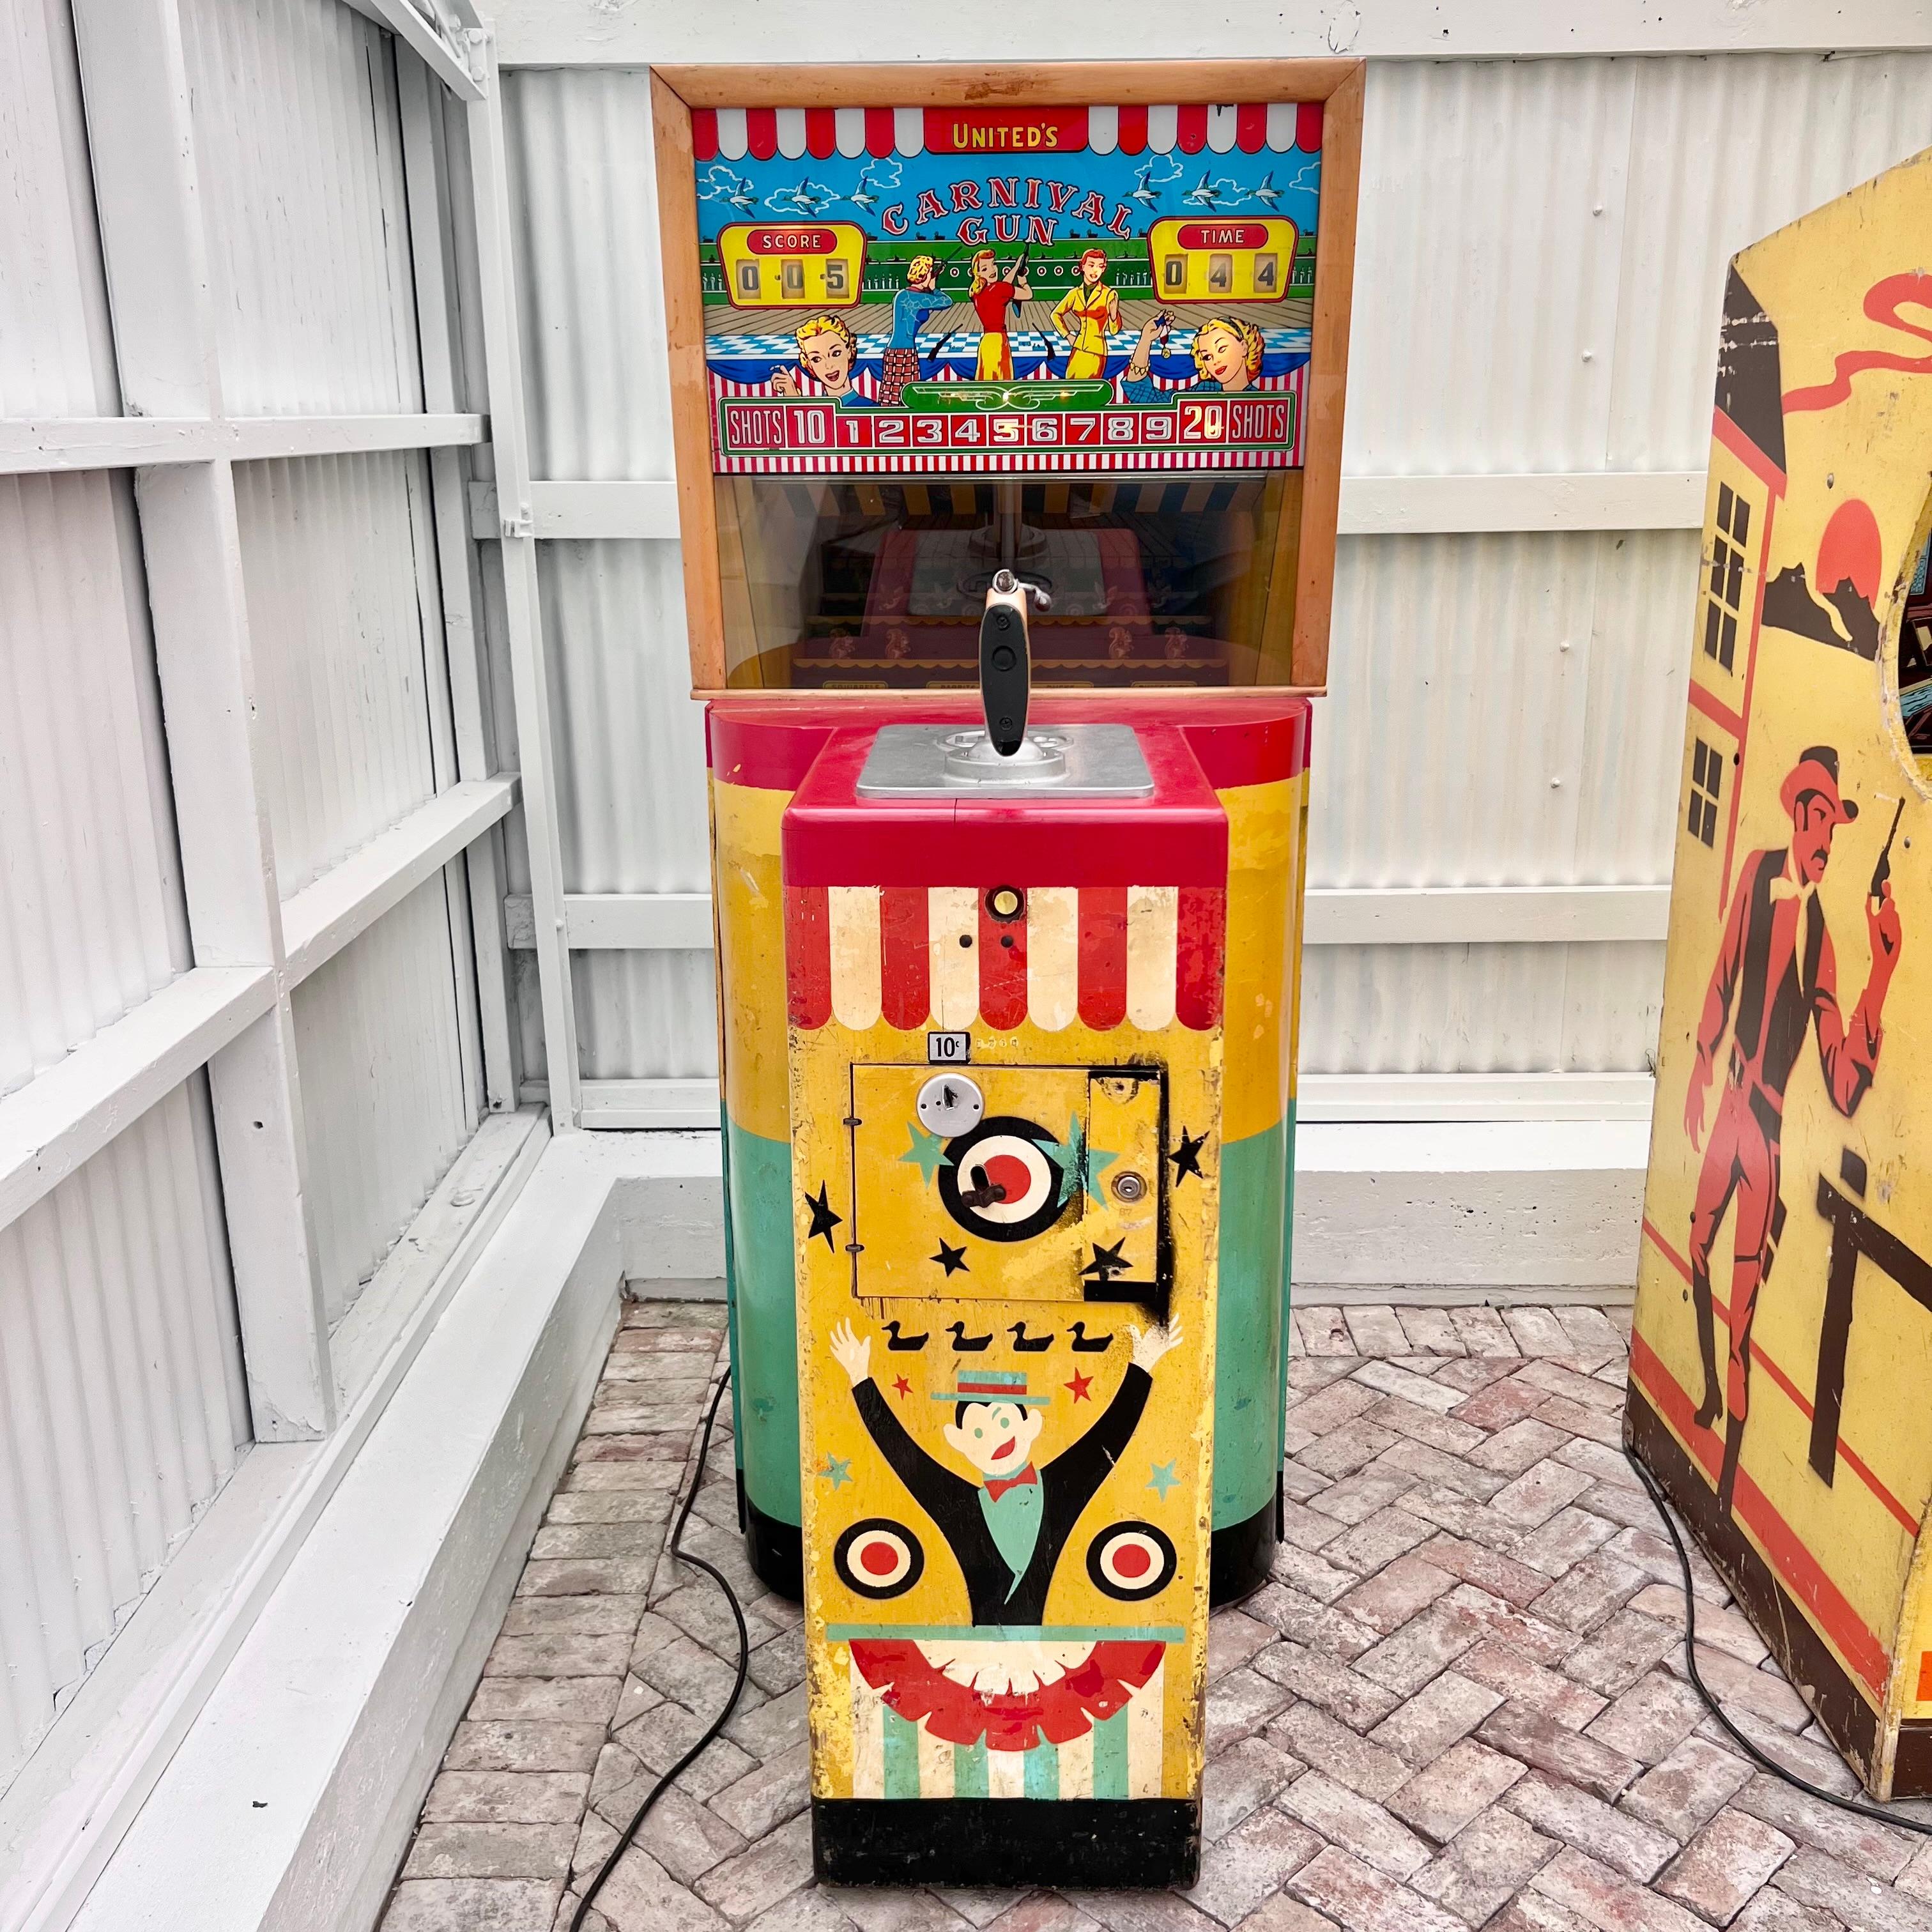 Vintage circa 1954 “Carnival Gun” arcade rifle game manufactured by United Mfg. Large Dale-style gun game. As the targets are on the move, use the gun to shoot targets until the 20 shots given run out. There are 4 different types of targets;